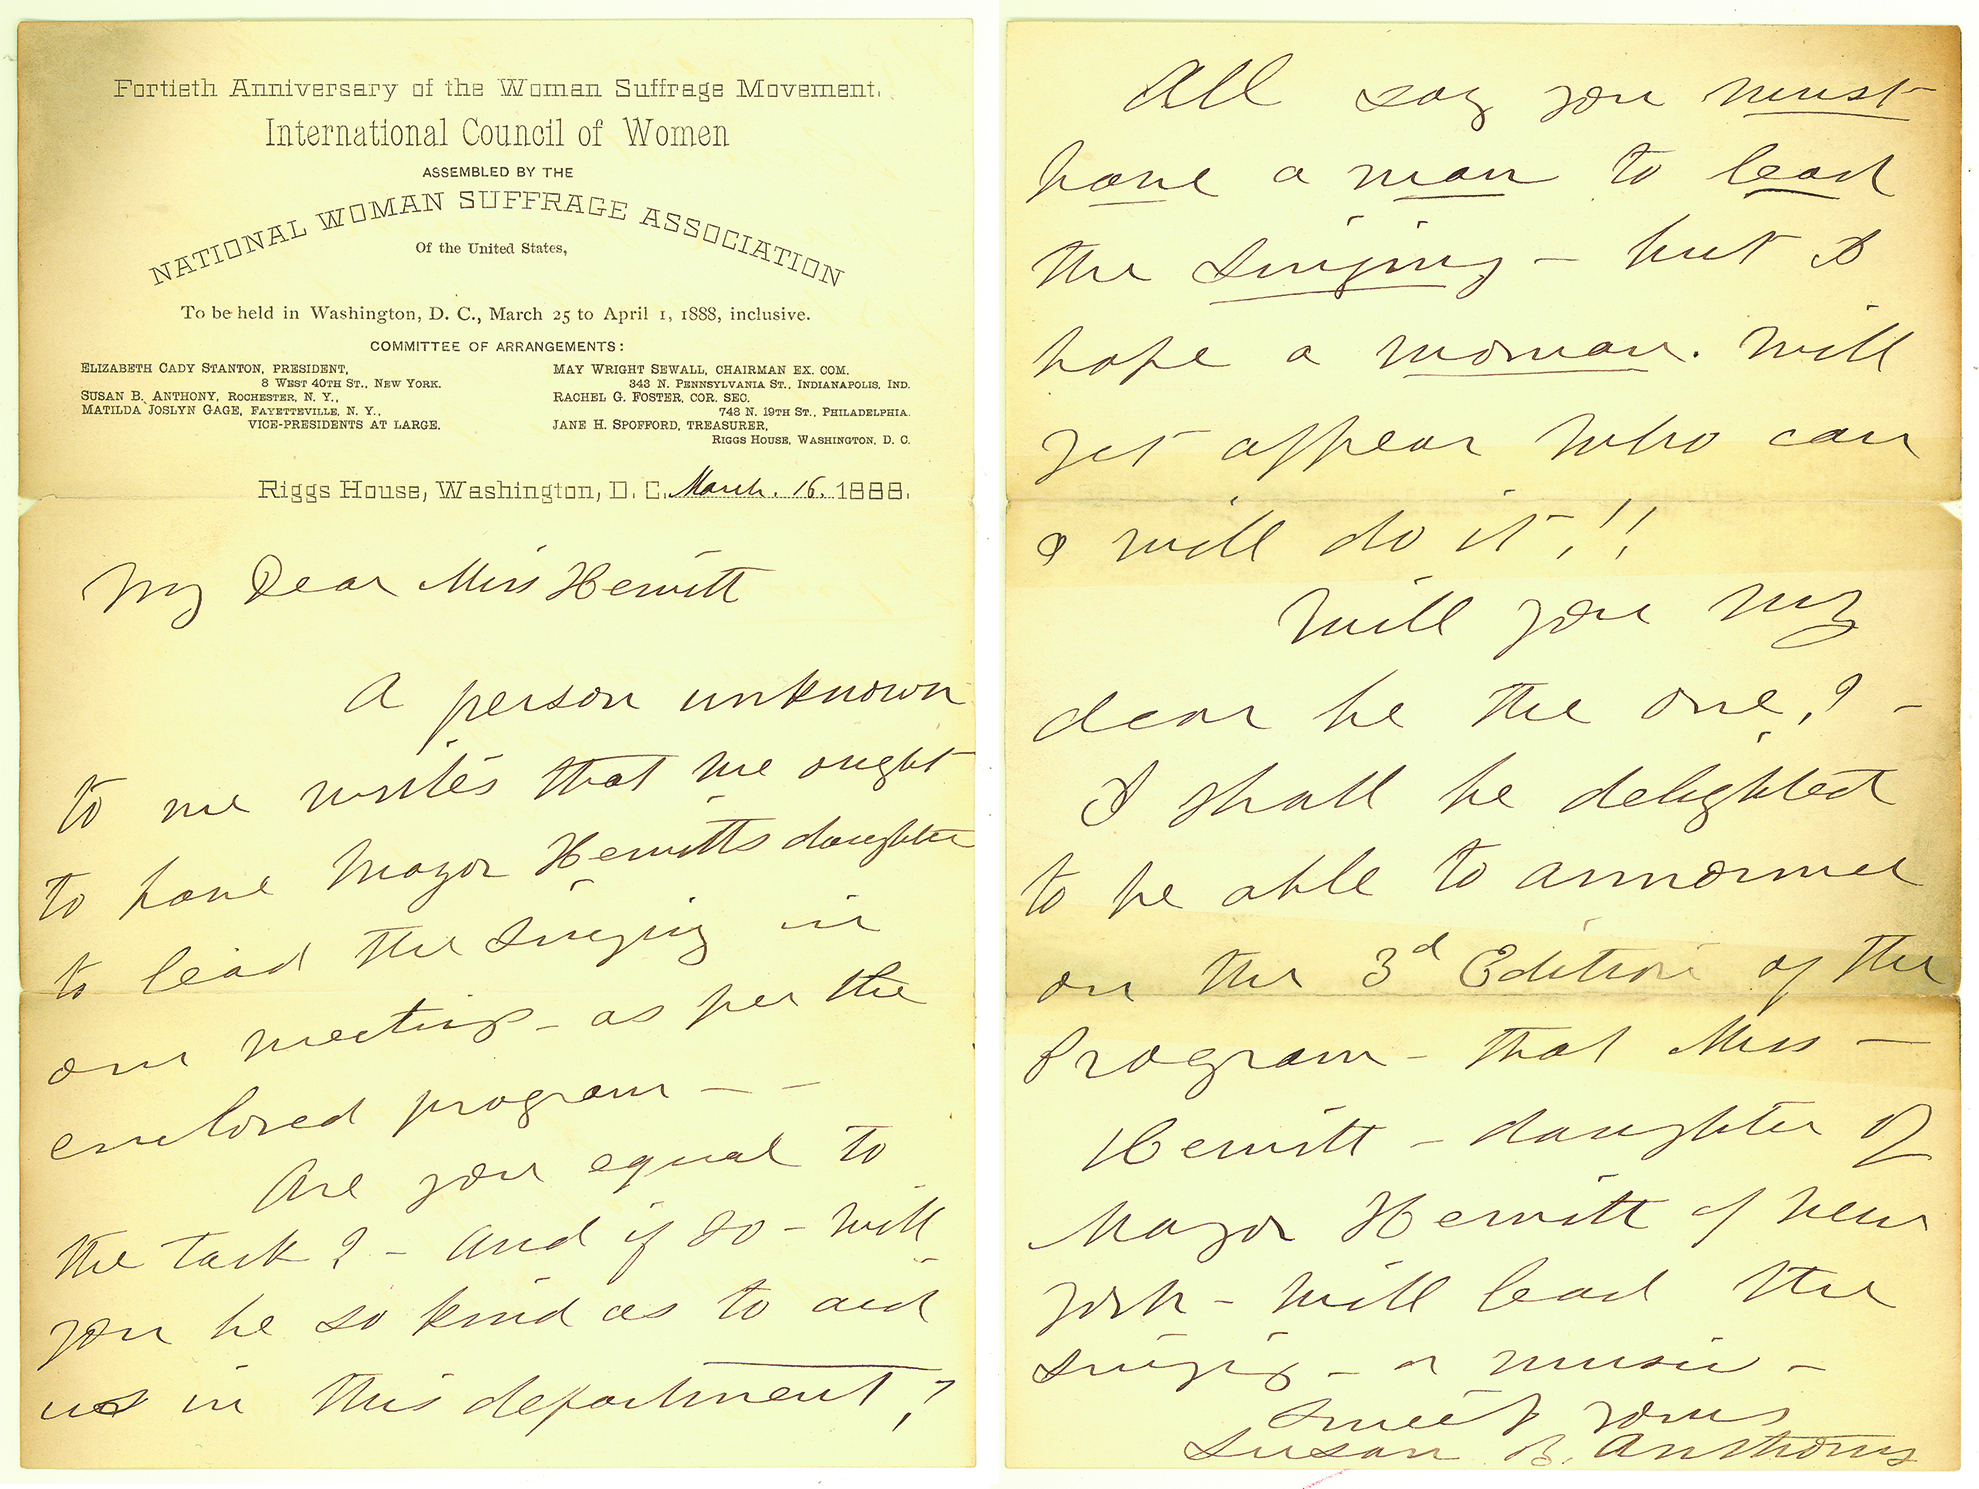 The front and page of a two-page letter on one sheet of paper. The top has typeset information regarding the International Council of Women followed by several dozen lines of handwritten text and signed, finally, by Susan B. Anthony.